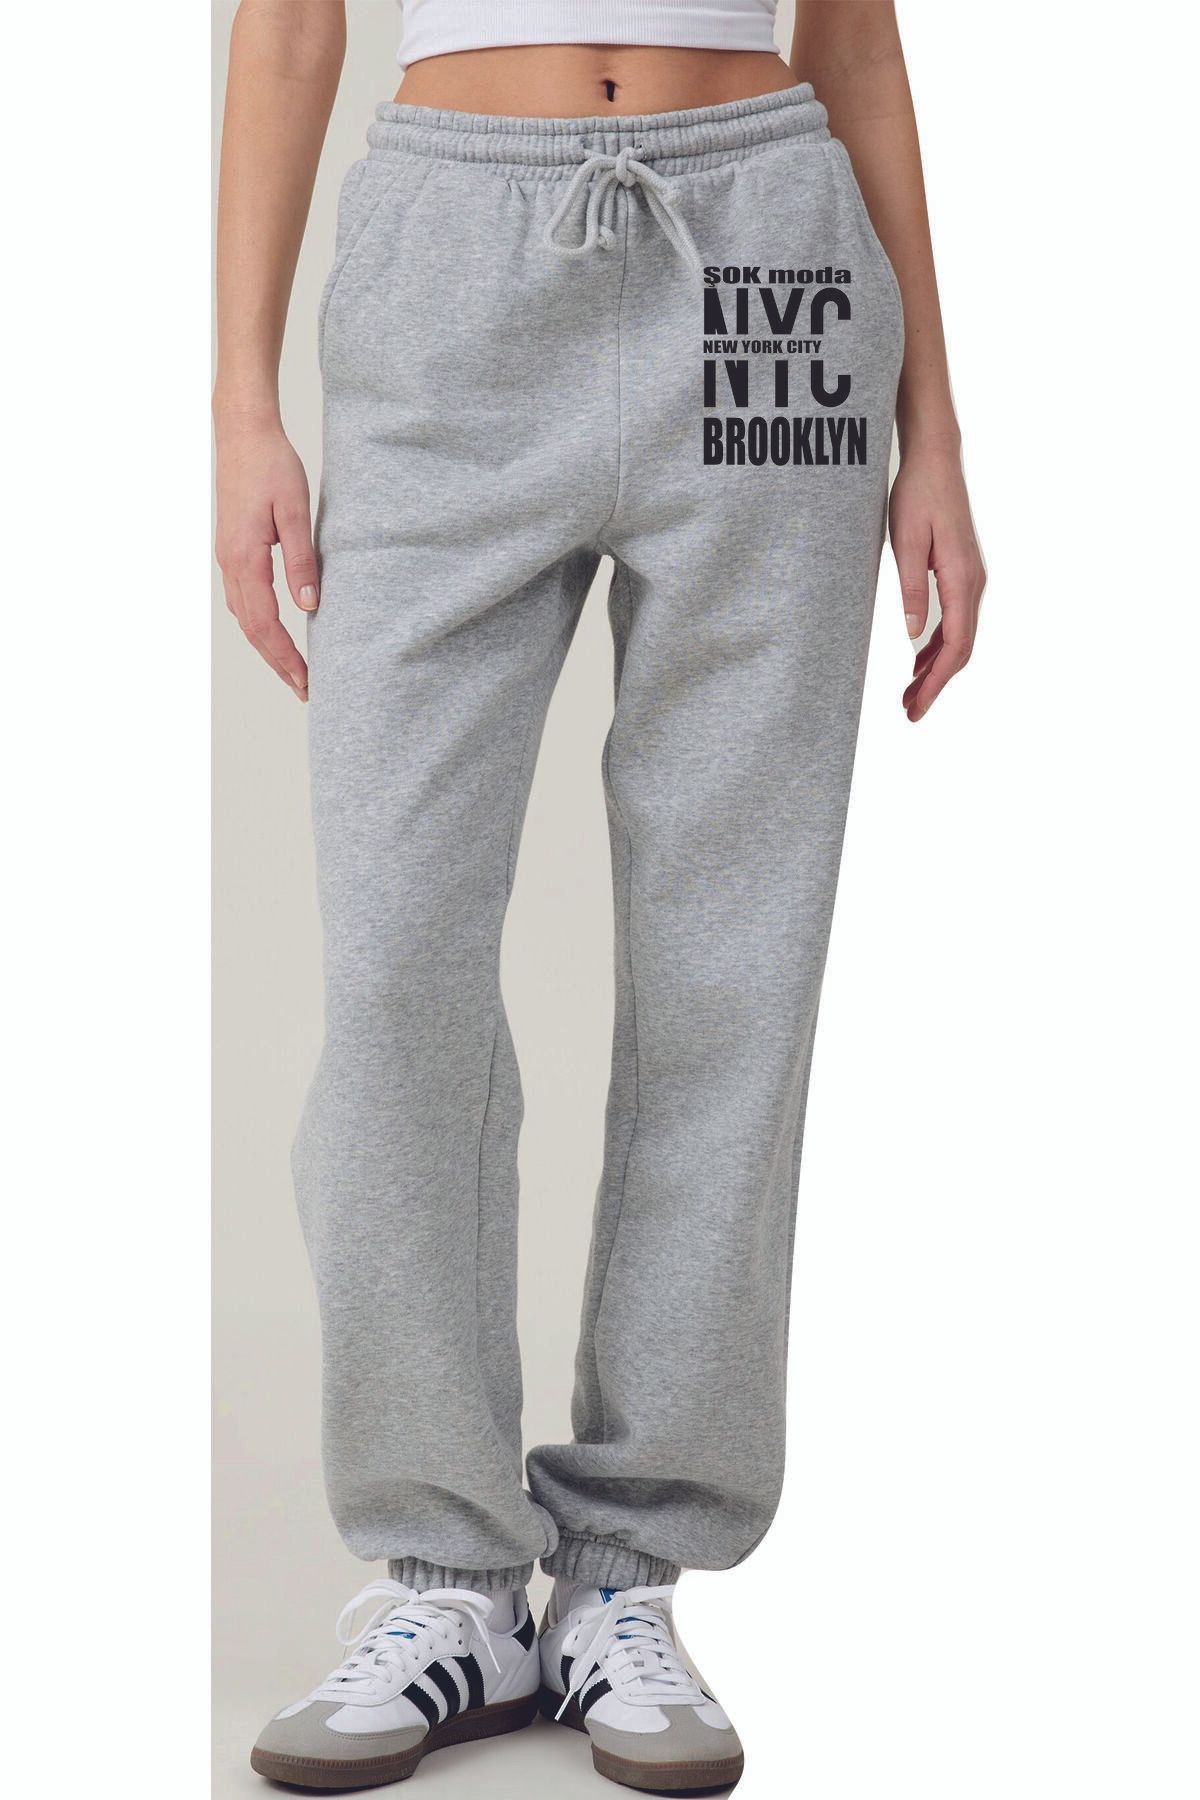 HOFFNUNG NYC tracksuit lowers